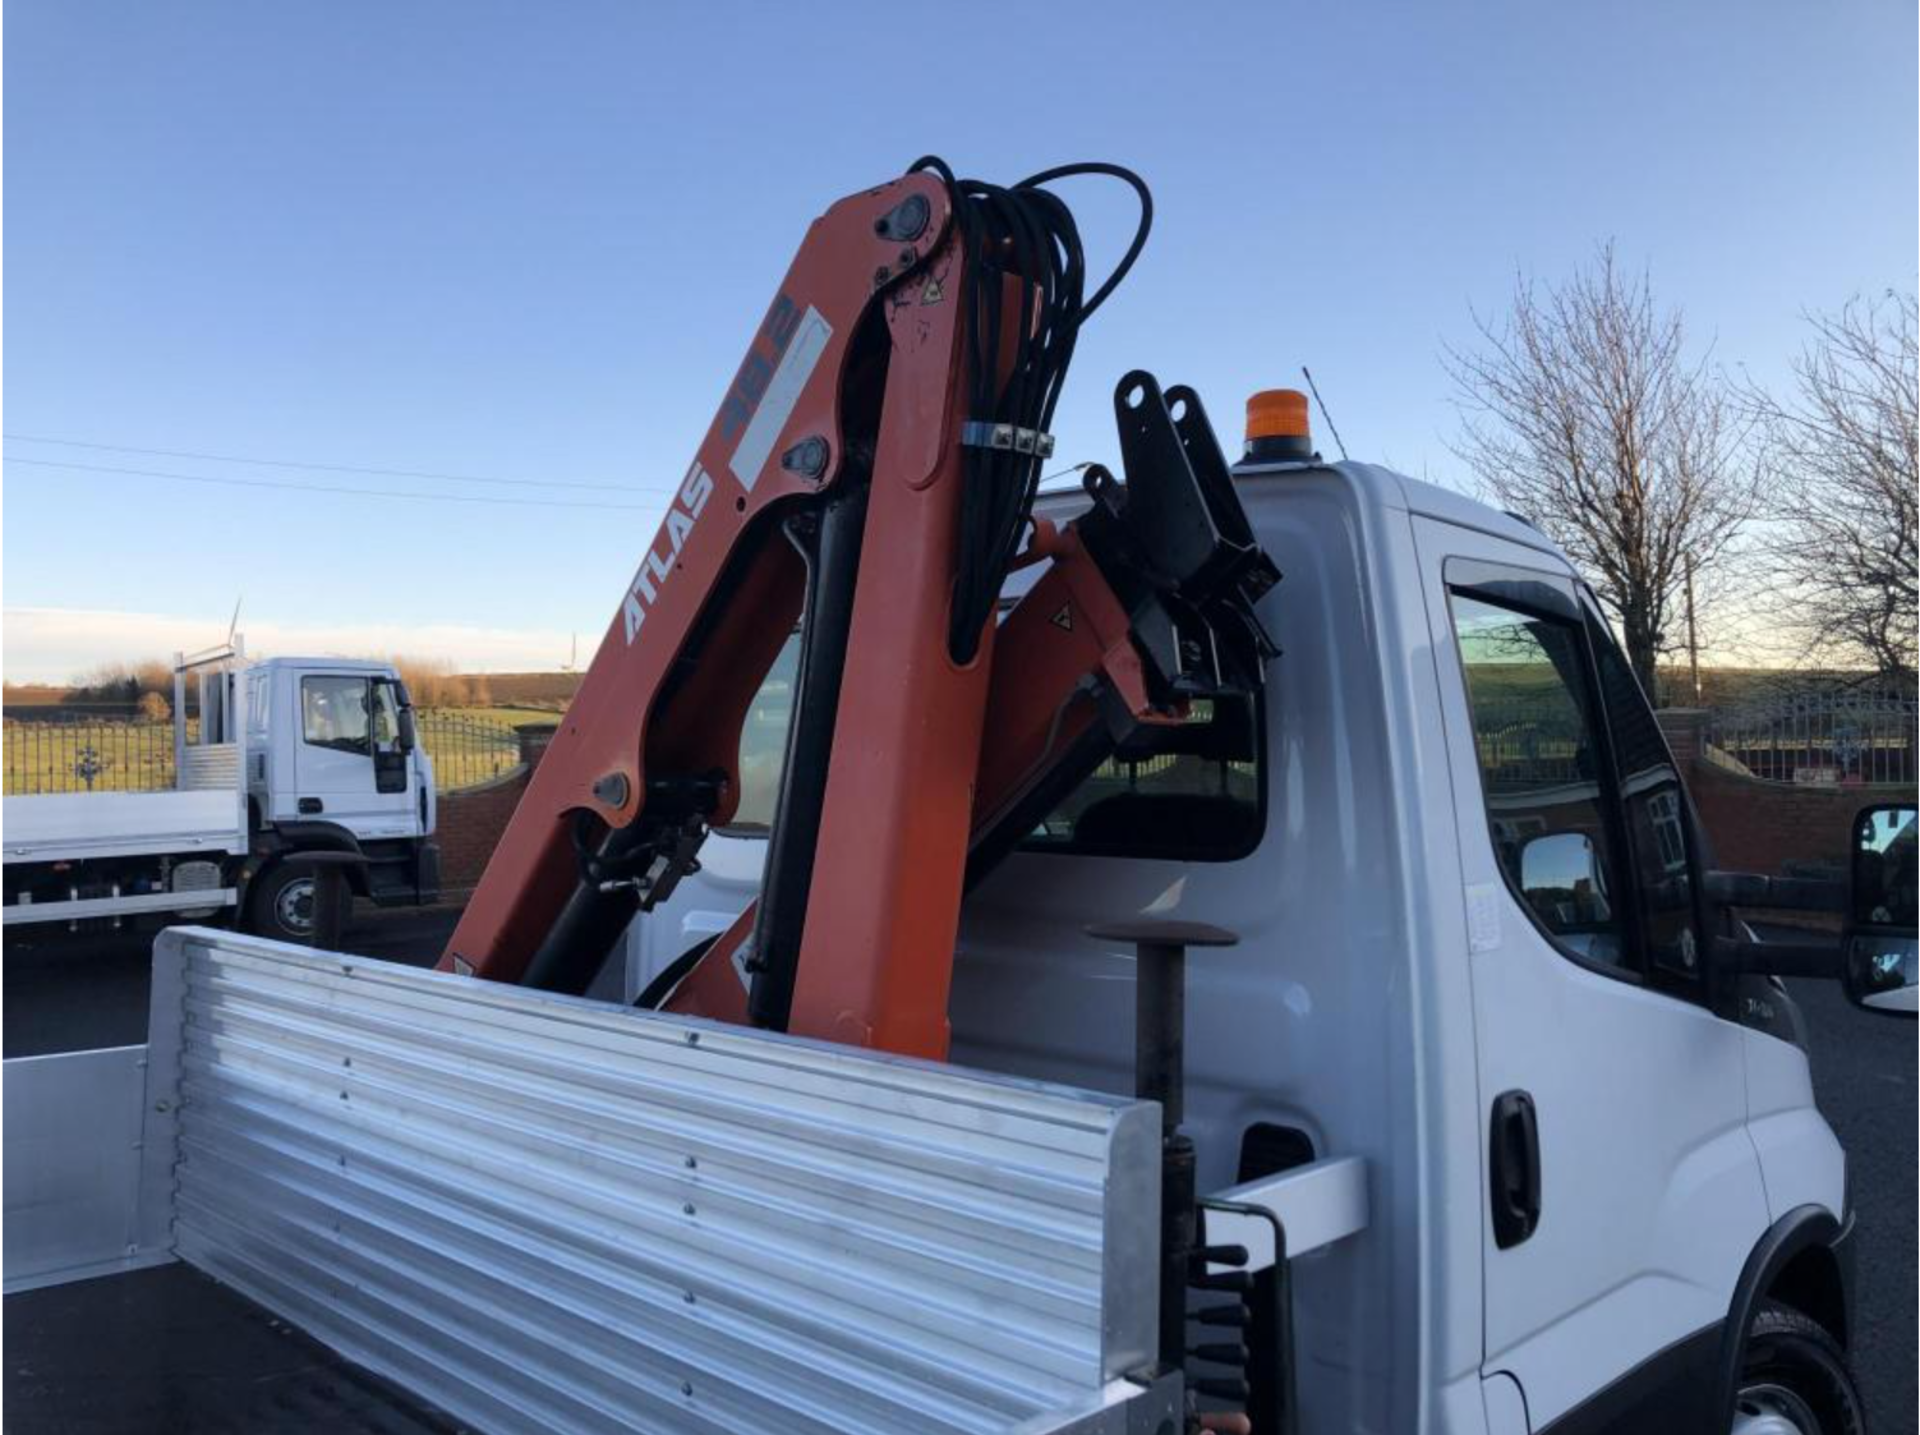 2014/ 64 PLATE IVECO DAILY 70-170 7TON GROSS, DROP SIDE BODY WITH ATLAS TEREX 48.2 CRANE *PLUS VAT* - Image 6 of 20